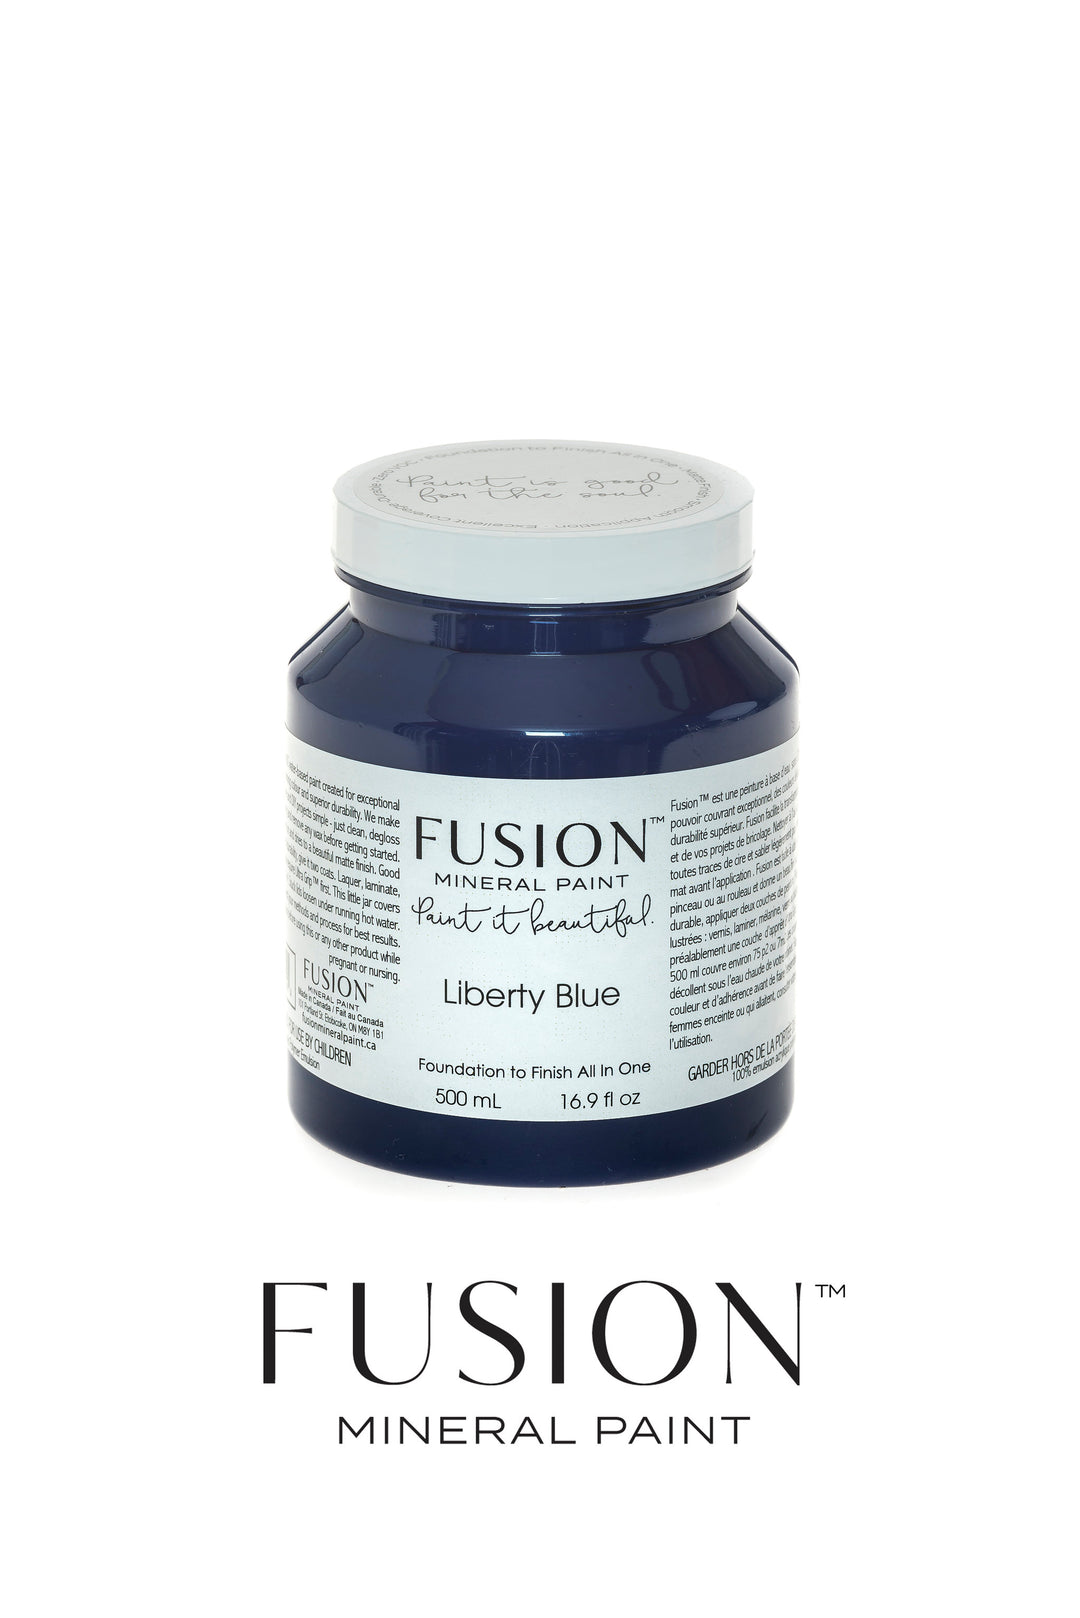 Fusion Mineral Paint-LIBERTY BLUE (Pint) - Acosta's Home